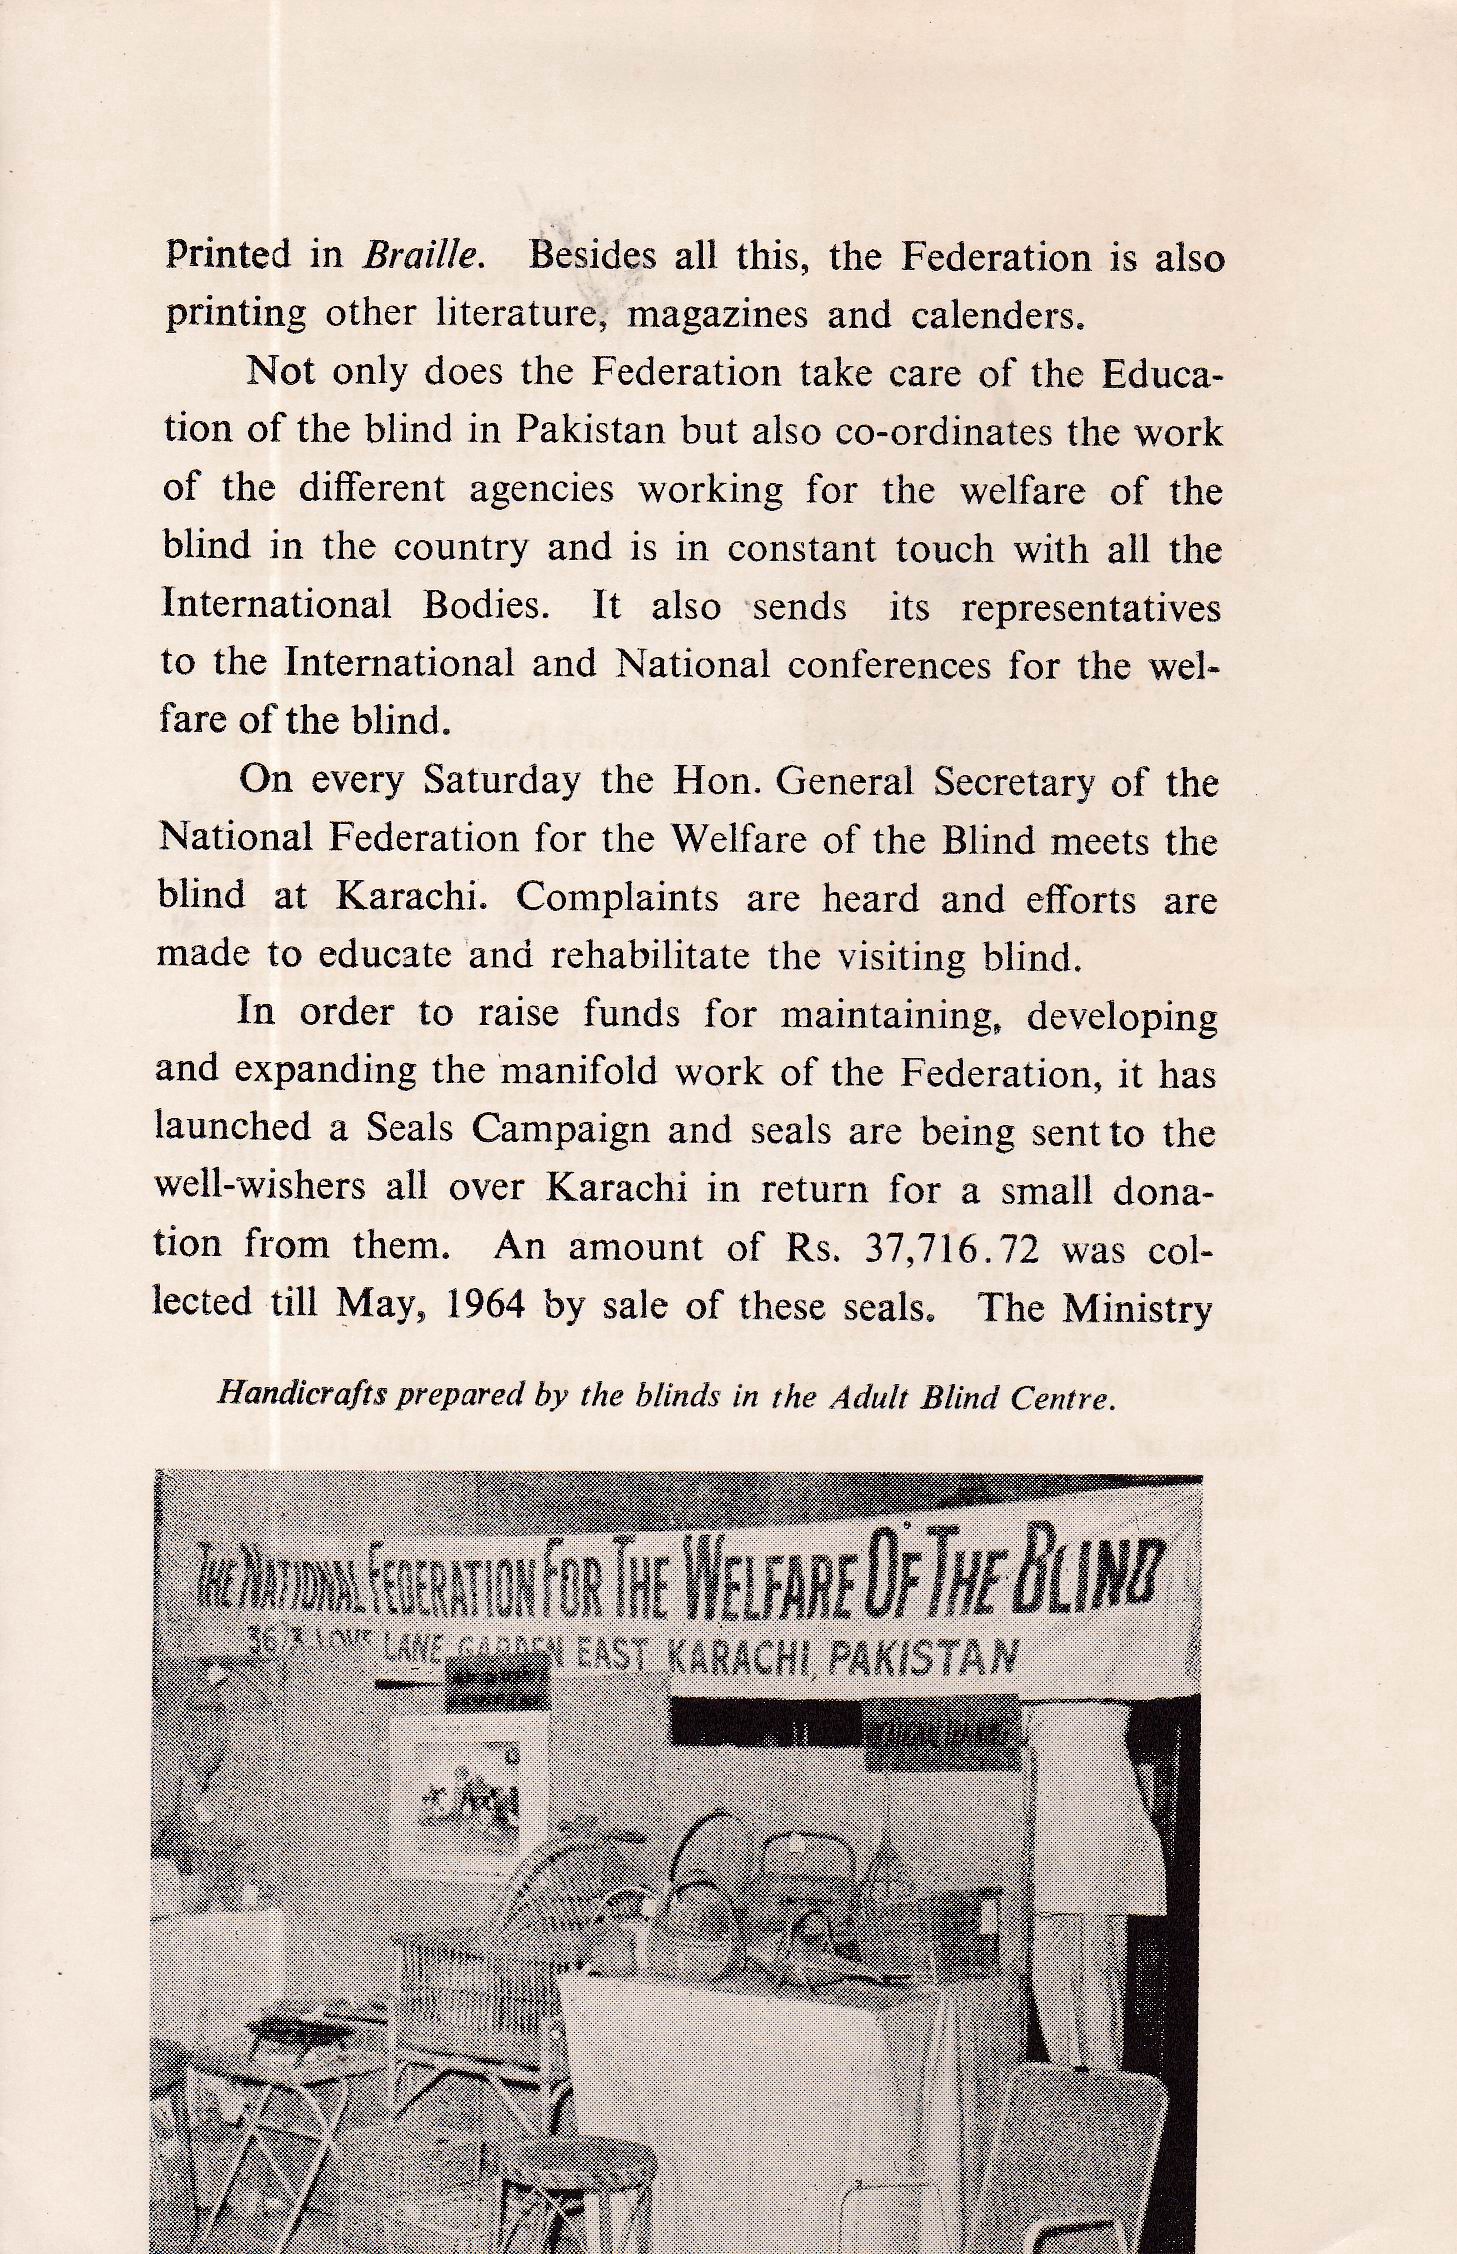 Pakistan Fdc 1965 Brochure & Stamp Help the Blind - Click Image to Close